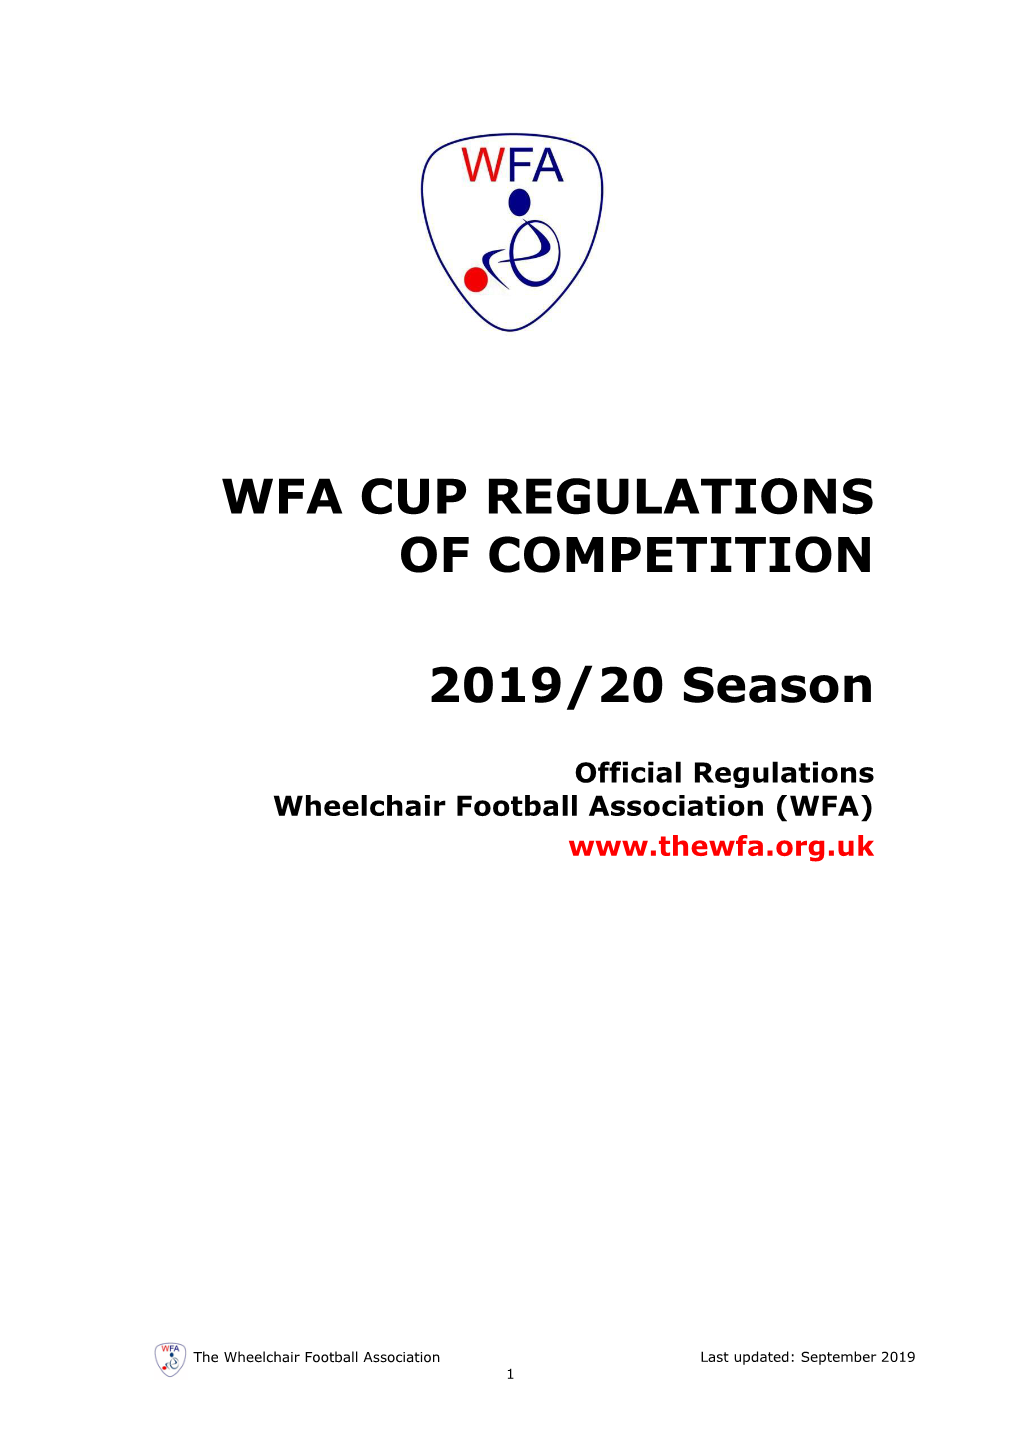 WFA CUP REGULATIONS of COMPETITION 2019/20 Season